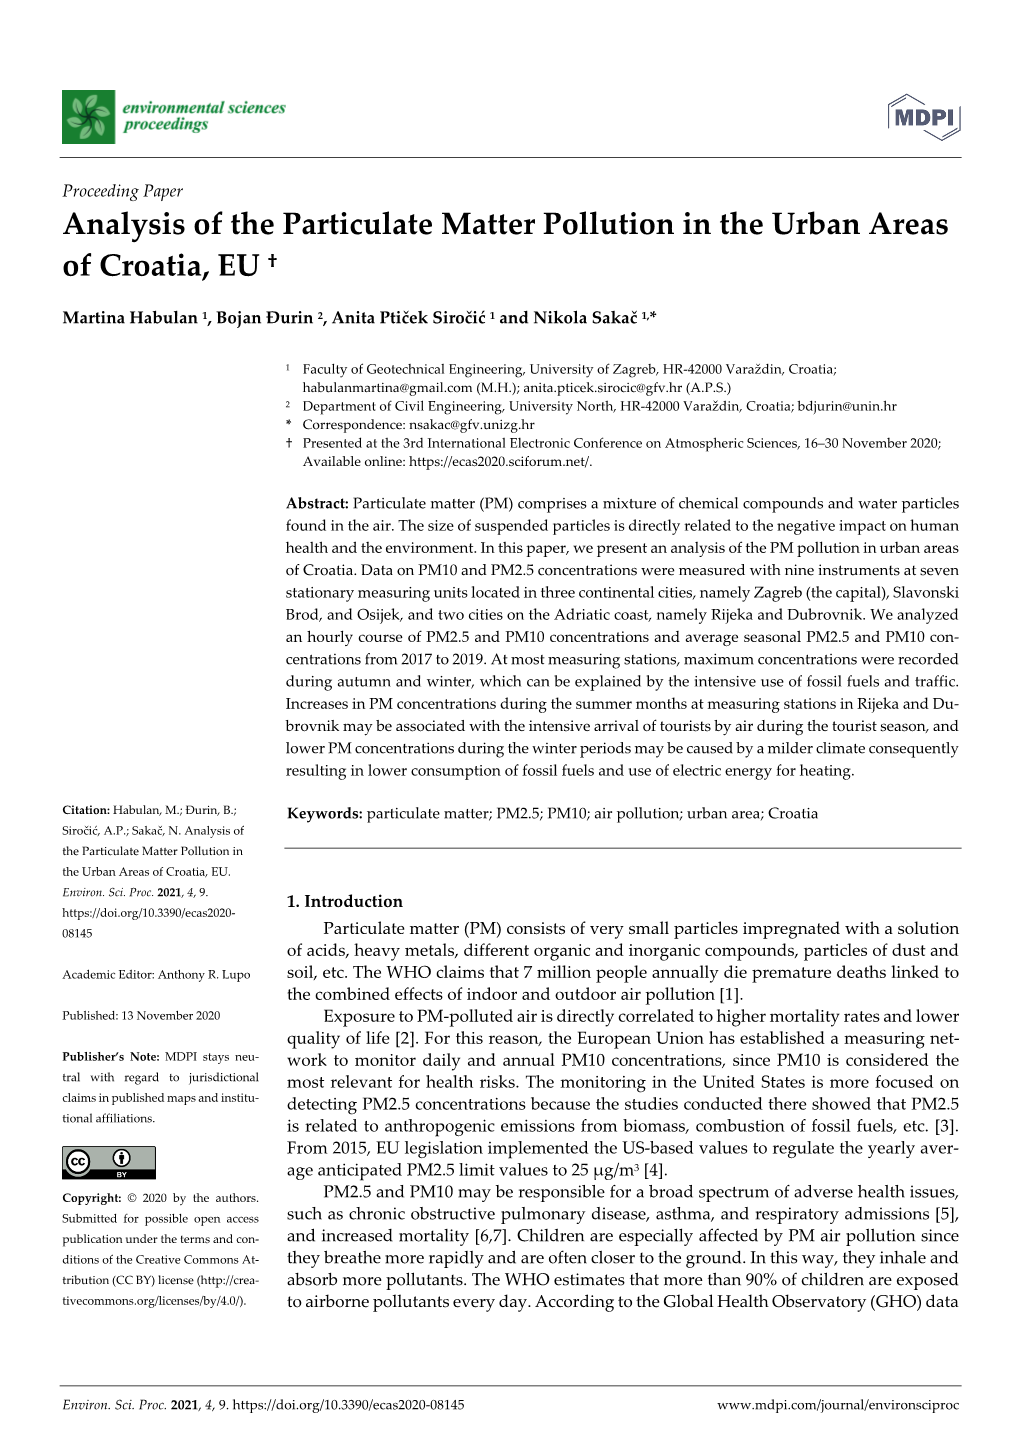 Analysis of the Particulate Matter Pollution in the Urban Areas of Croatia, EU †